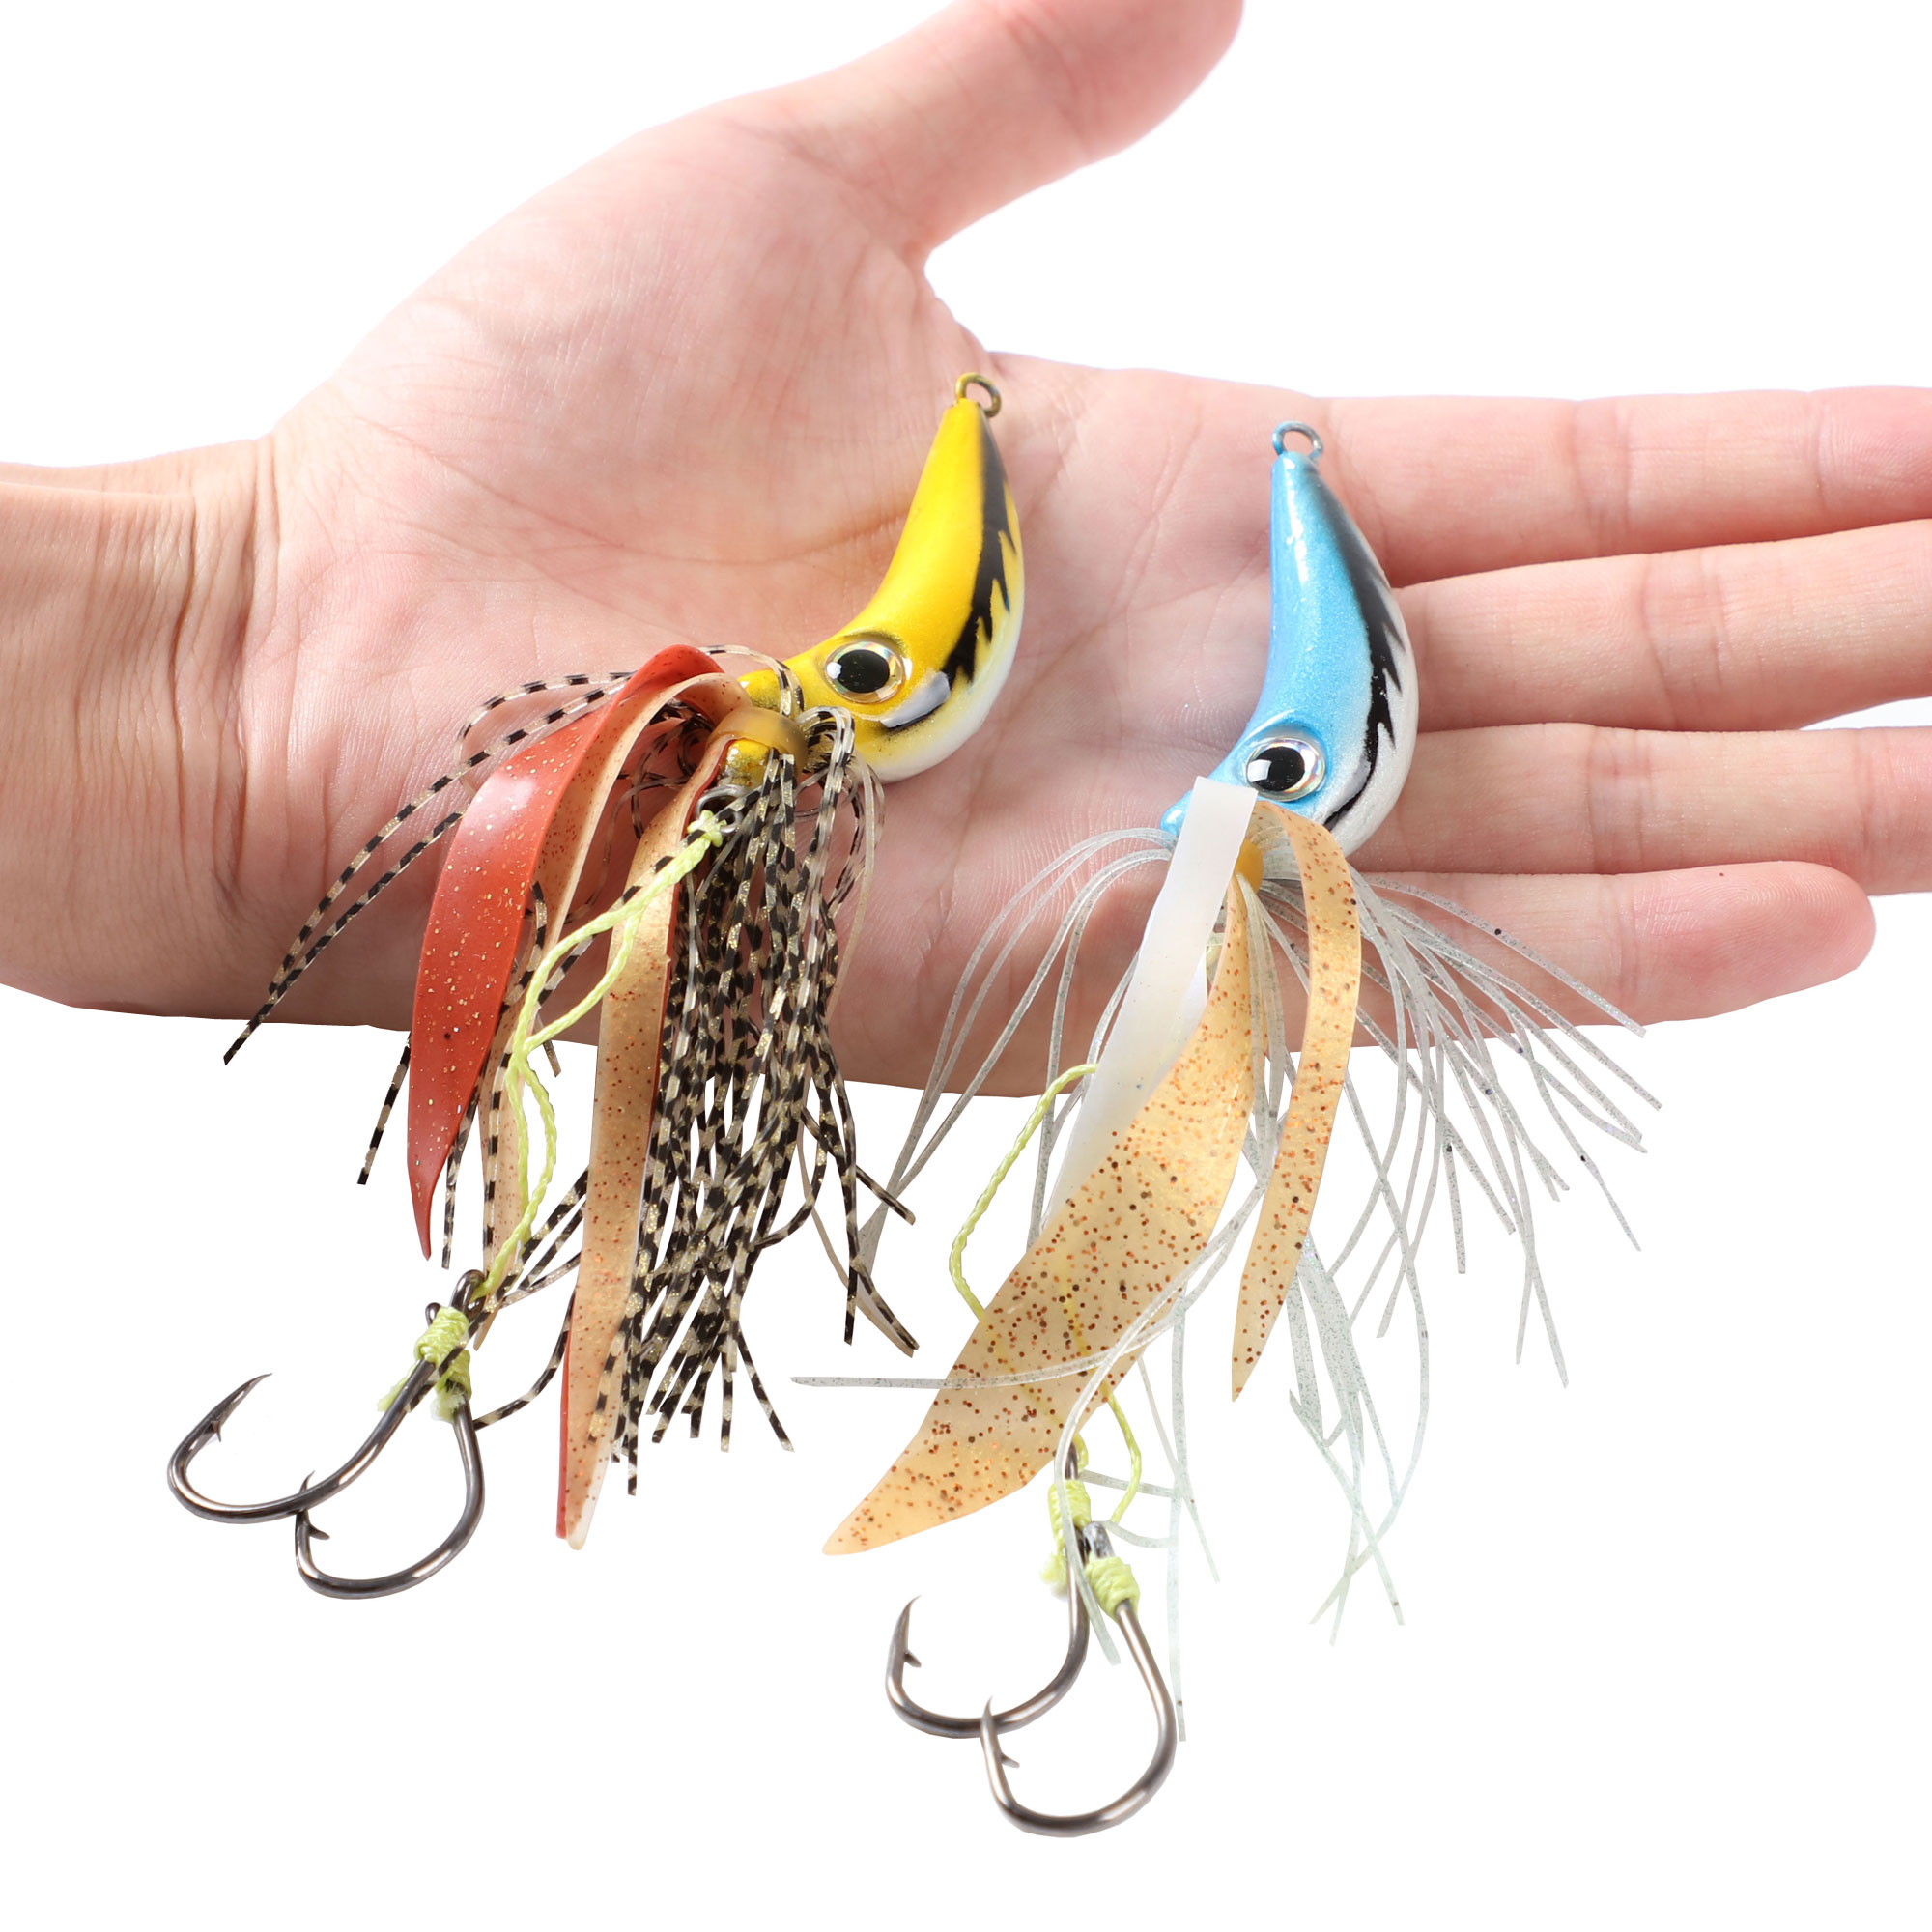 FREE FISHER 2pcs/pack Fishing Lures Baits with Silicone Skirts and Barbed 5.5cm 63g Fishhooks Artificial Baits Fishing Tackle Accessories